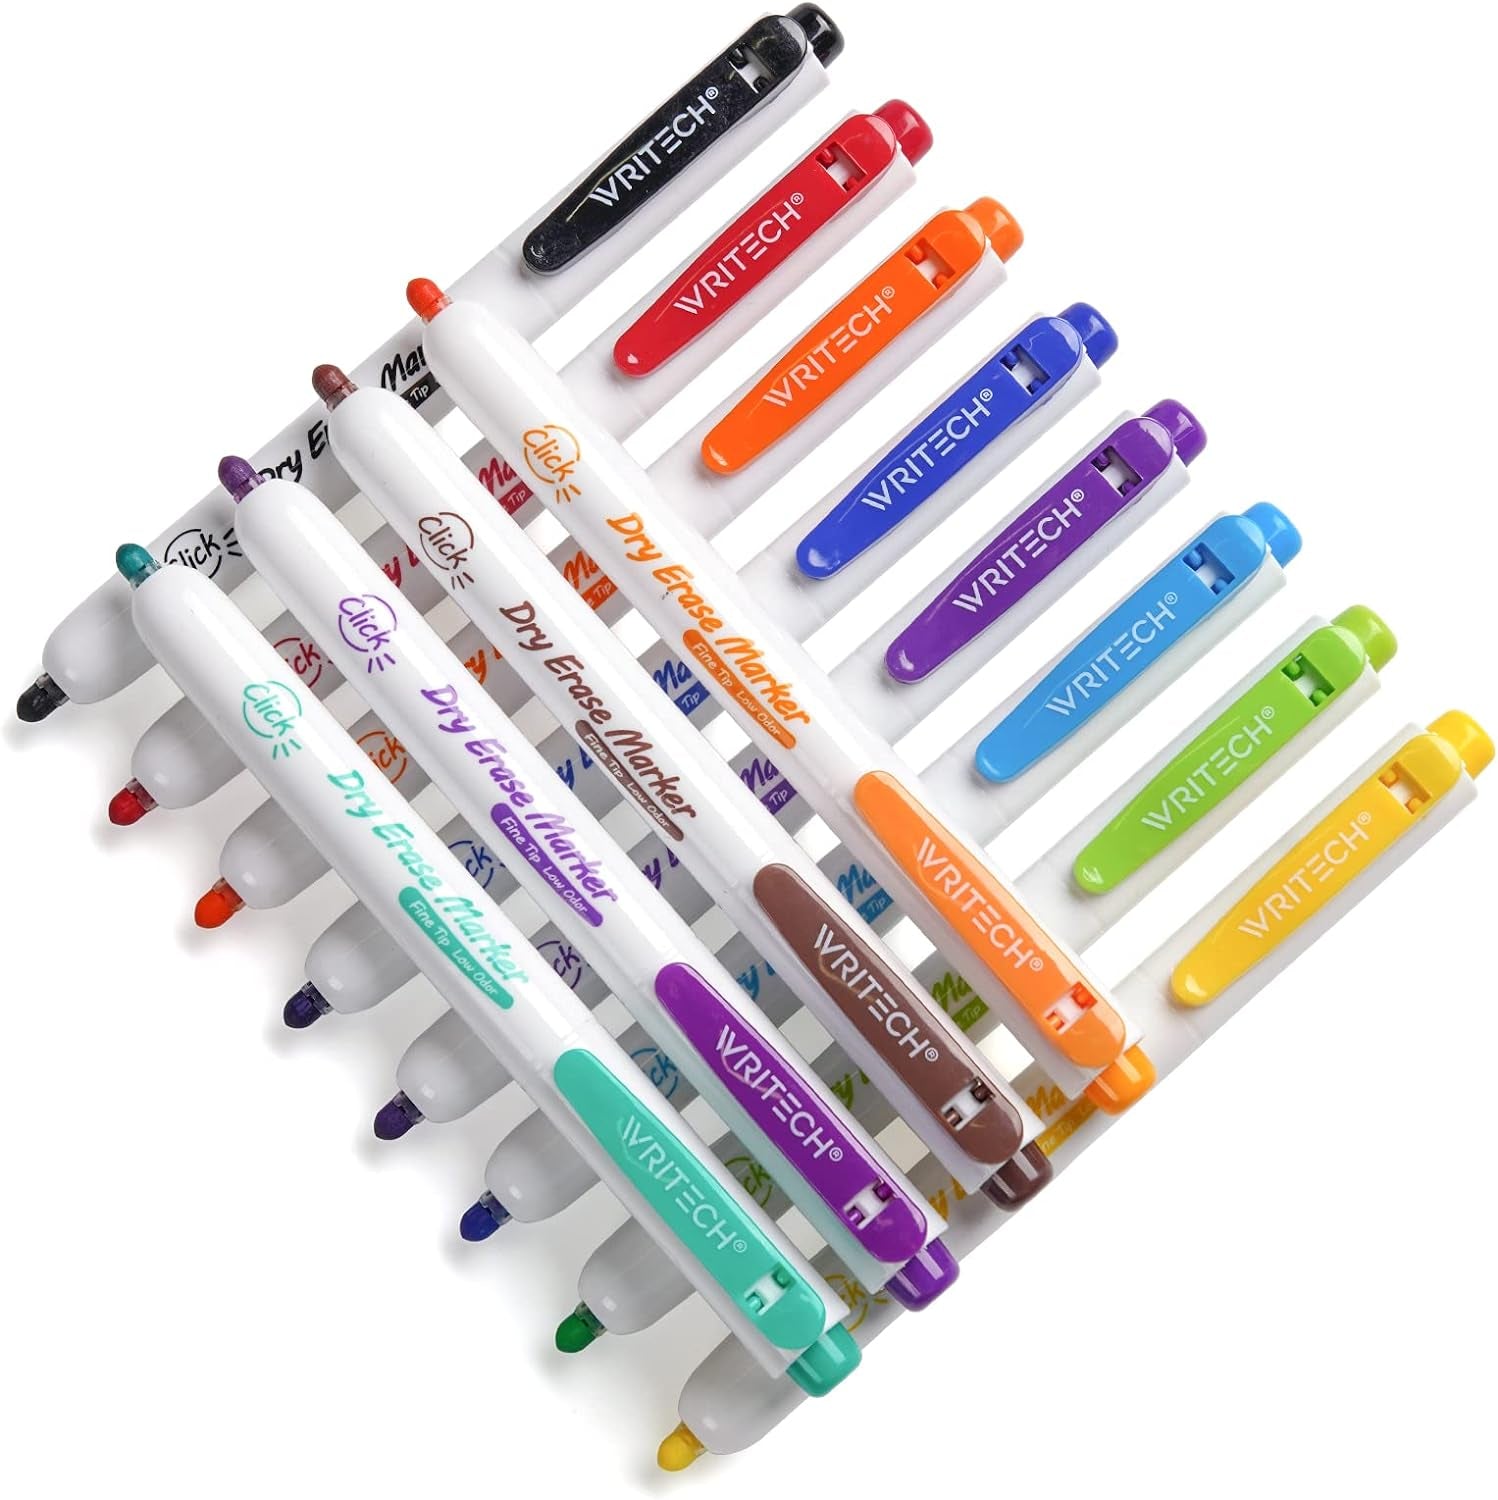 Retractable Dry Erase Markers: Fine Tip Assorted Colors Low Odor Multi Colored Set Kid Adult Refillable Clickable Multicolor Thin Point Whiteboard Marker Bulk 12Ct No Bleed Smear